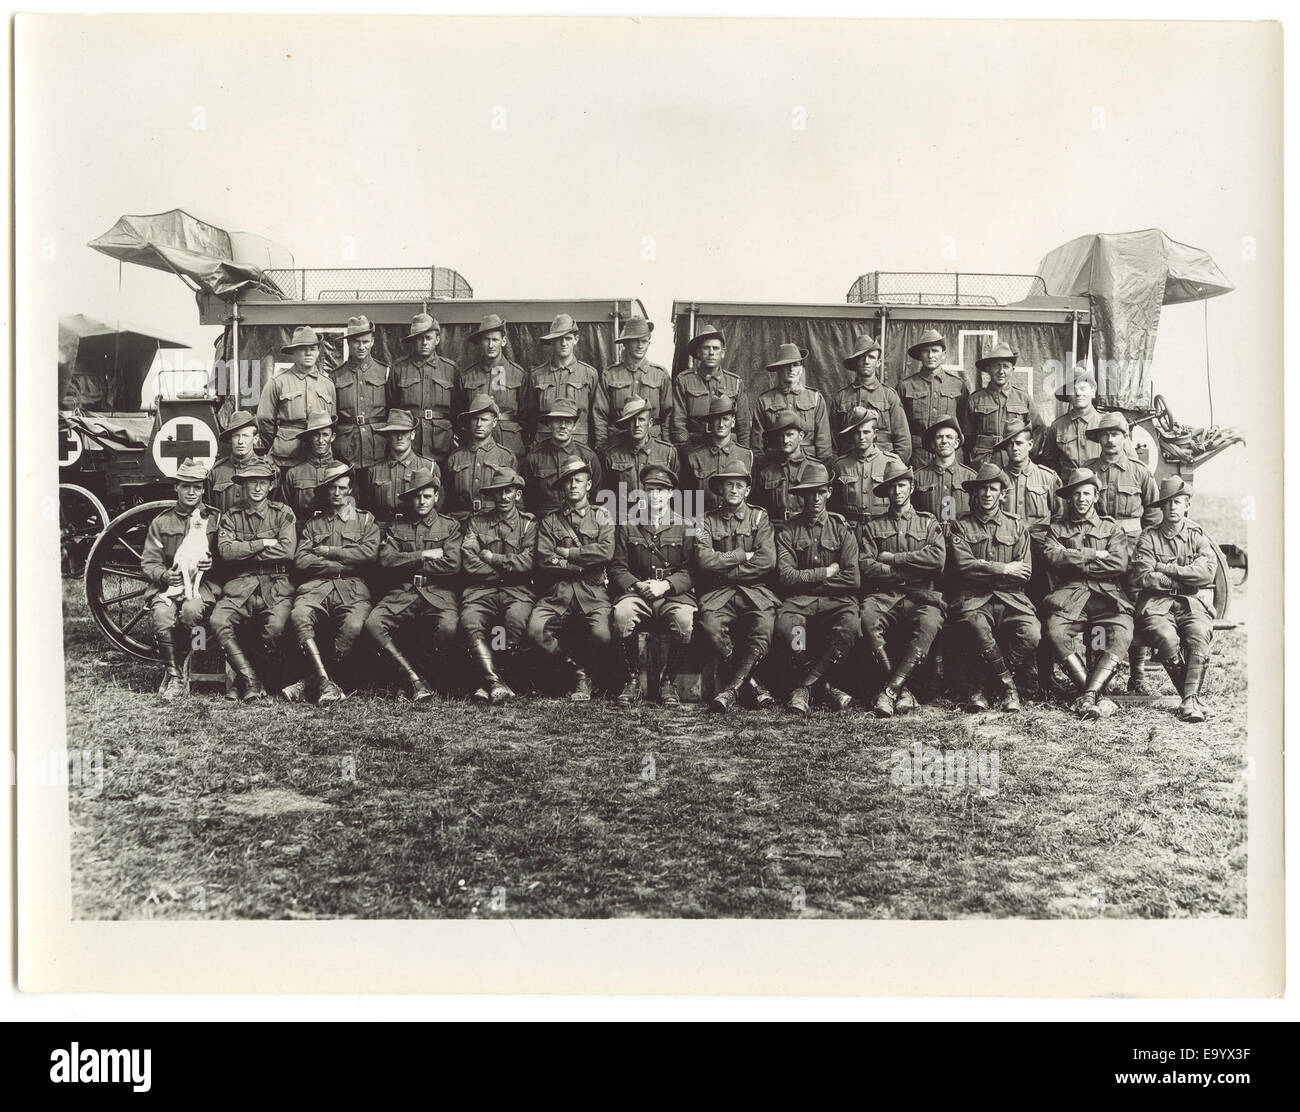 Major Lowe and Transport Section, 5 Field Ambulance [group portrait in front of vehicles] - taken by Official Photographers Major Lowe and Transport Section, 5 Field Ambulance [group portrait 14645508250 o Stock Photo